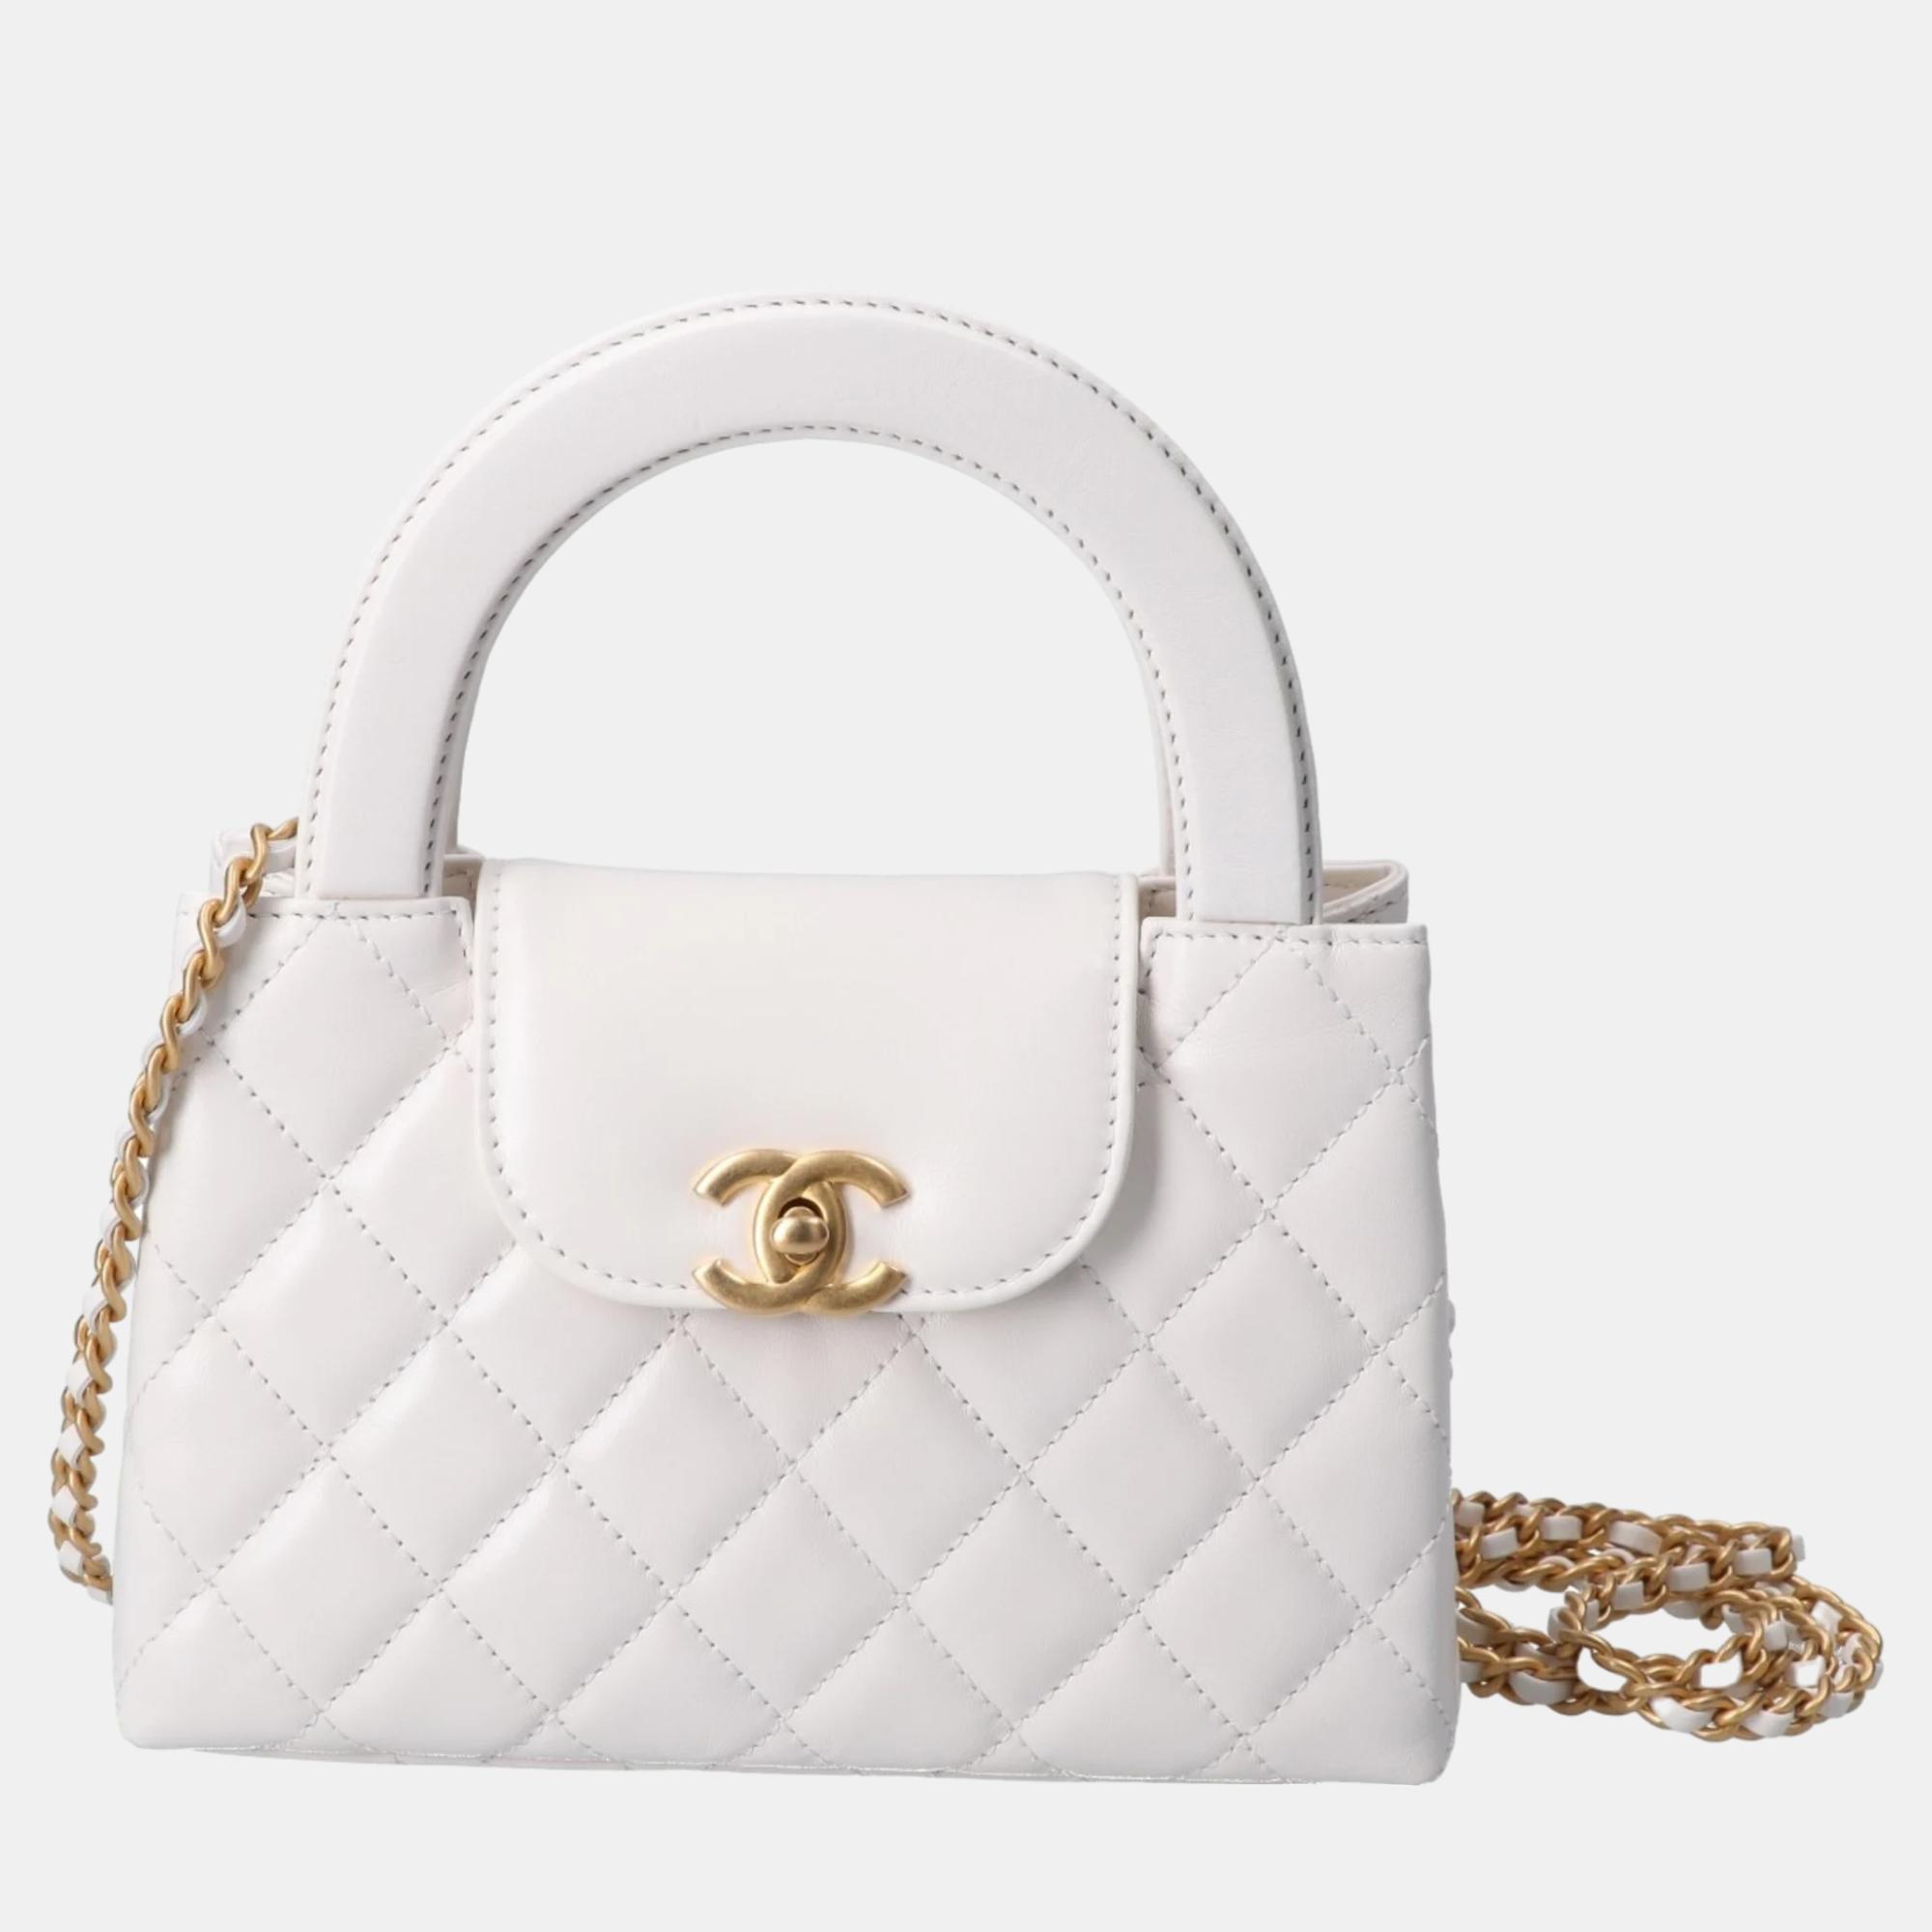 Chanel white quilted aged calfskin leather small kelly top handle bags